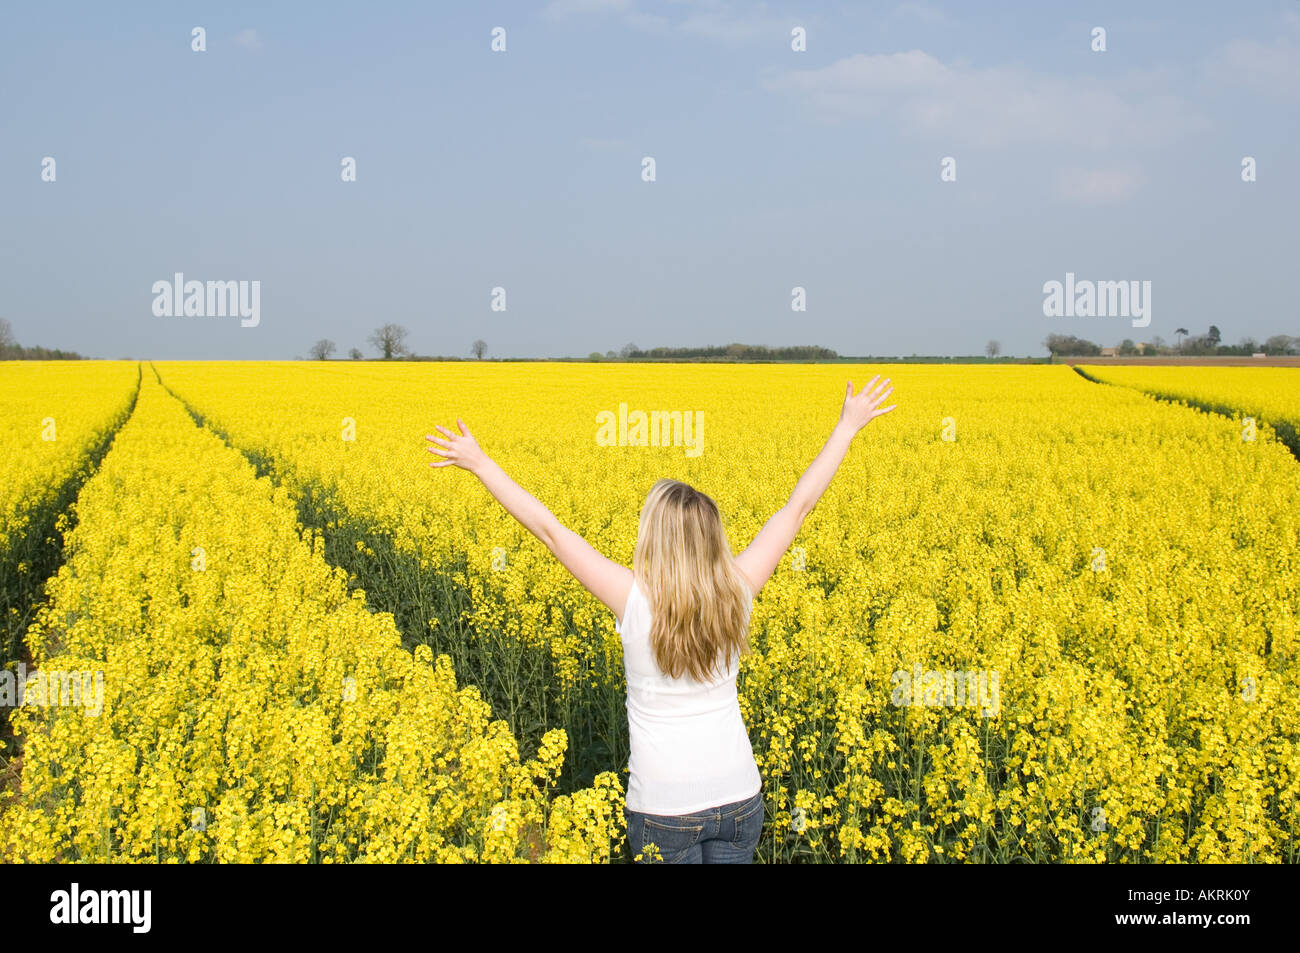 Woman in a field Stock Photo